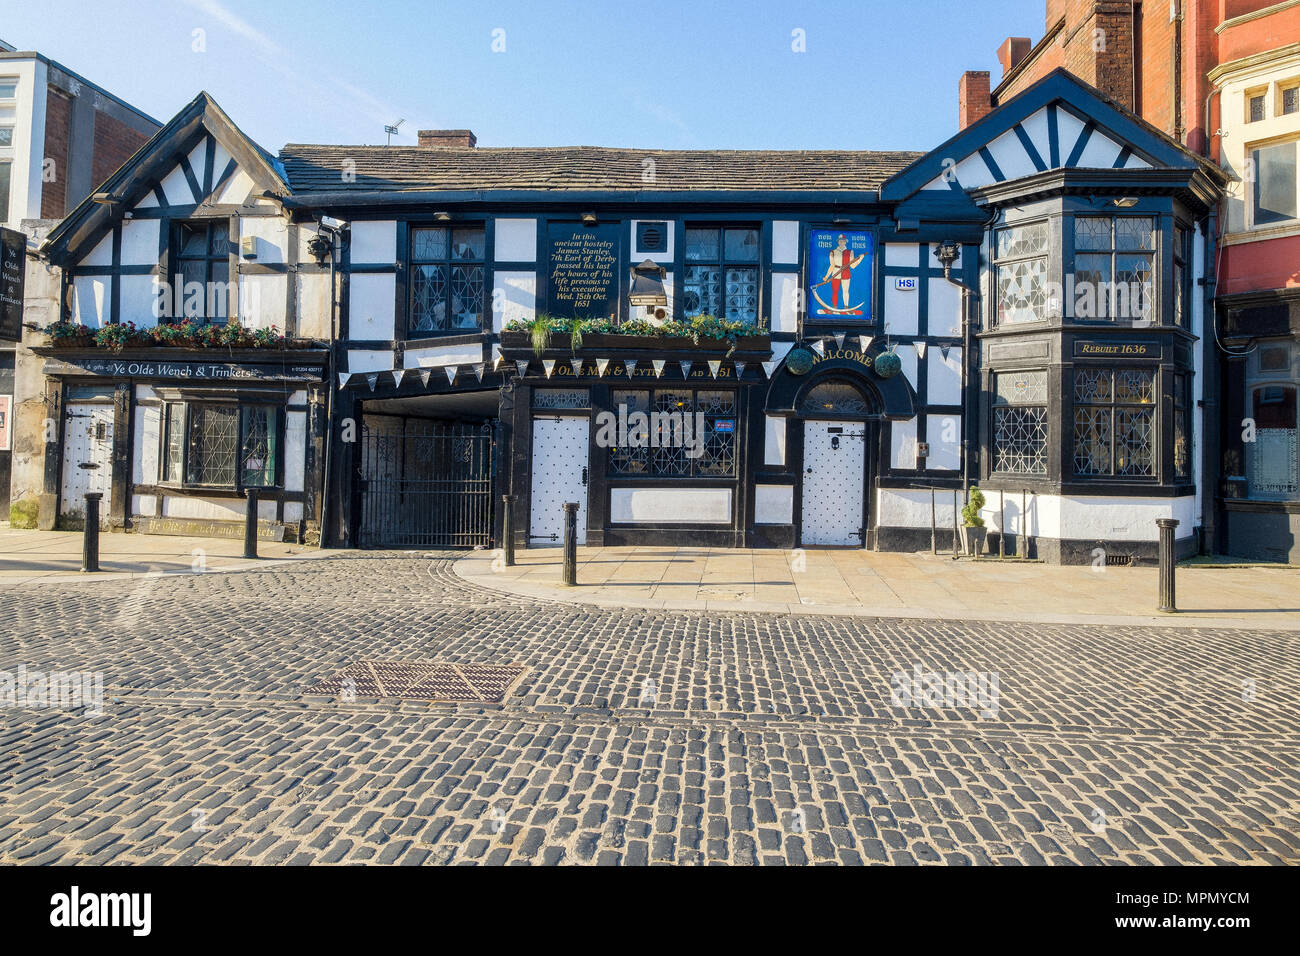 Man and Scythe public house Bolton Lancashire one of the oldest pubs in England Stock Photo